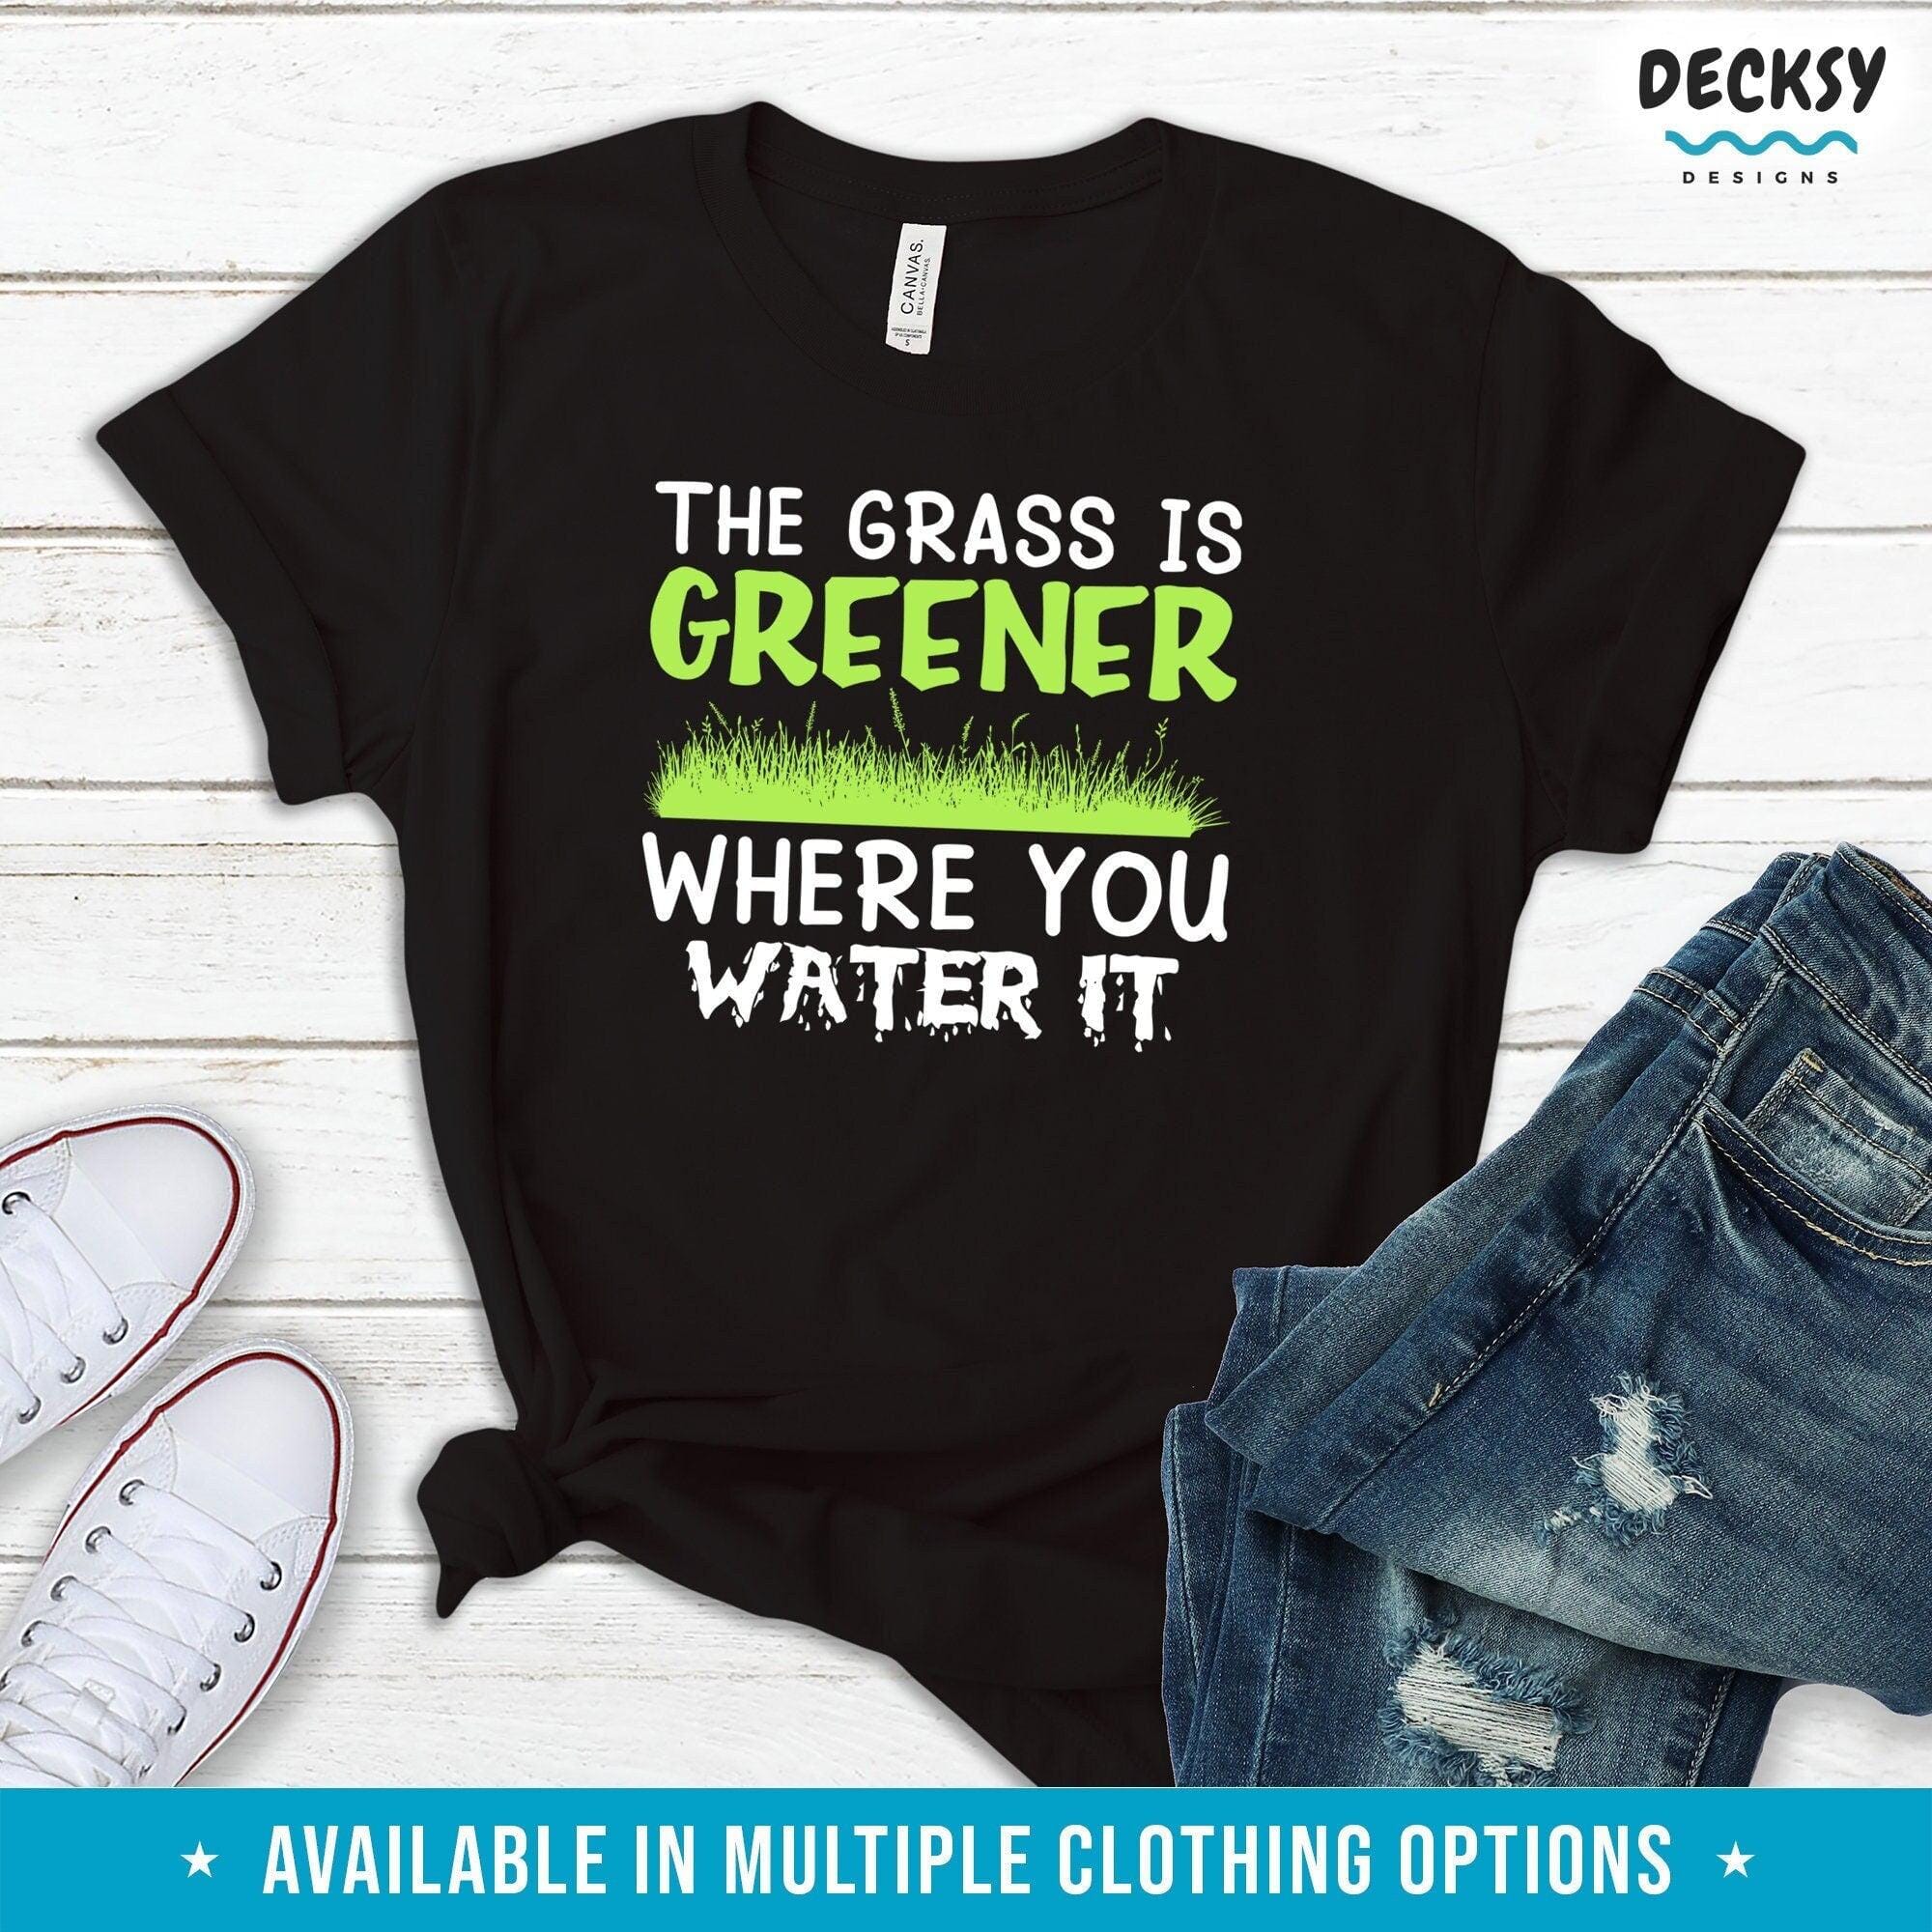 Gardening Gifts, Lawn Mowing Shirt-Clothing:Gender-Neutral Adult Clothing:Tops & Tees:T-shirts:Graphic Tees-DecksyDesigns